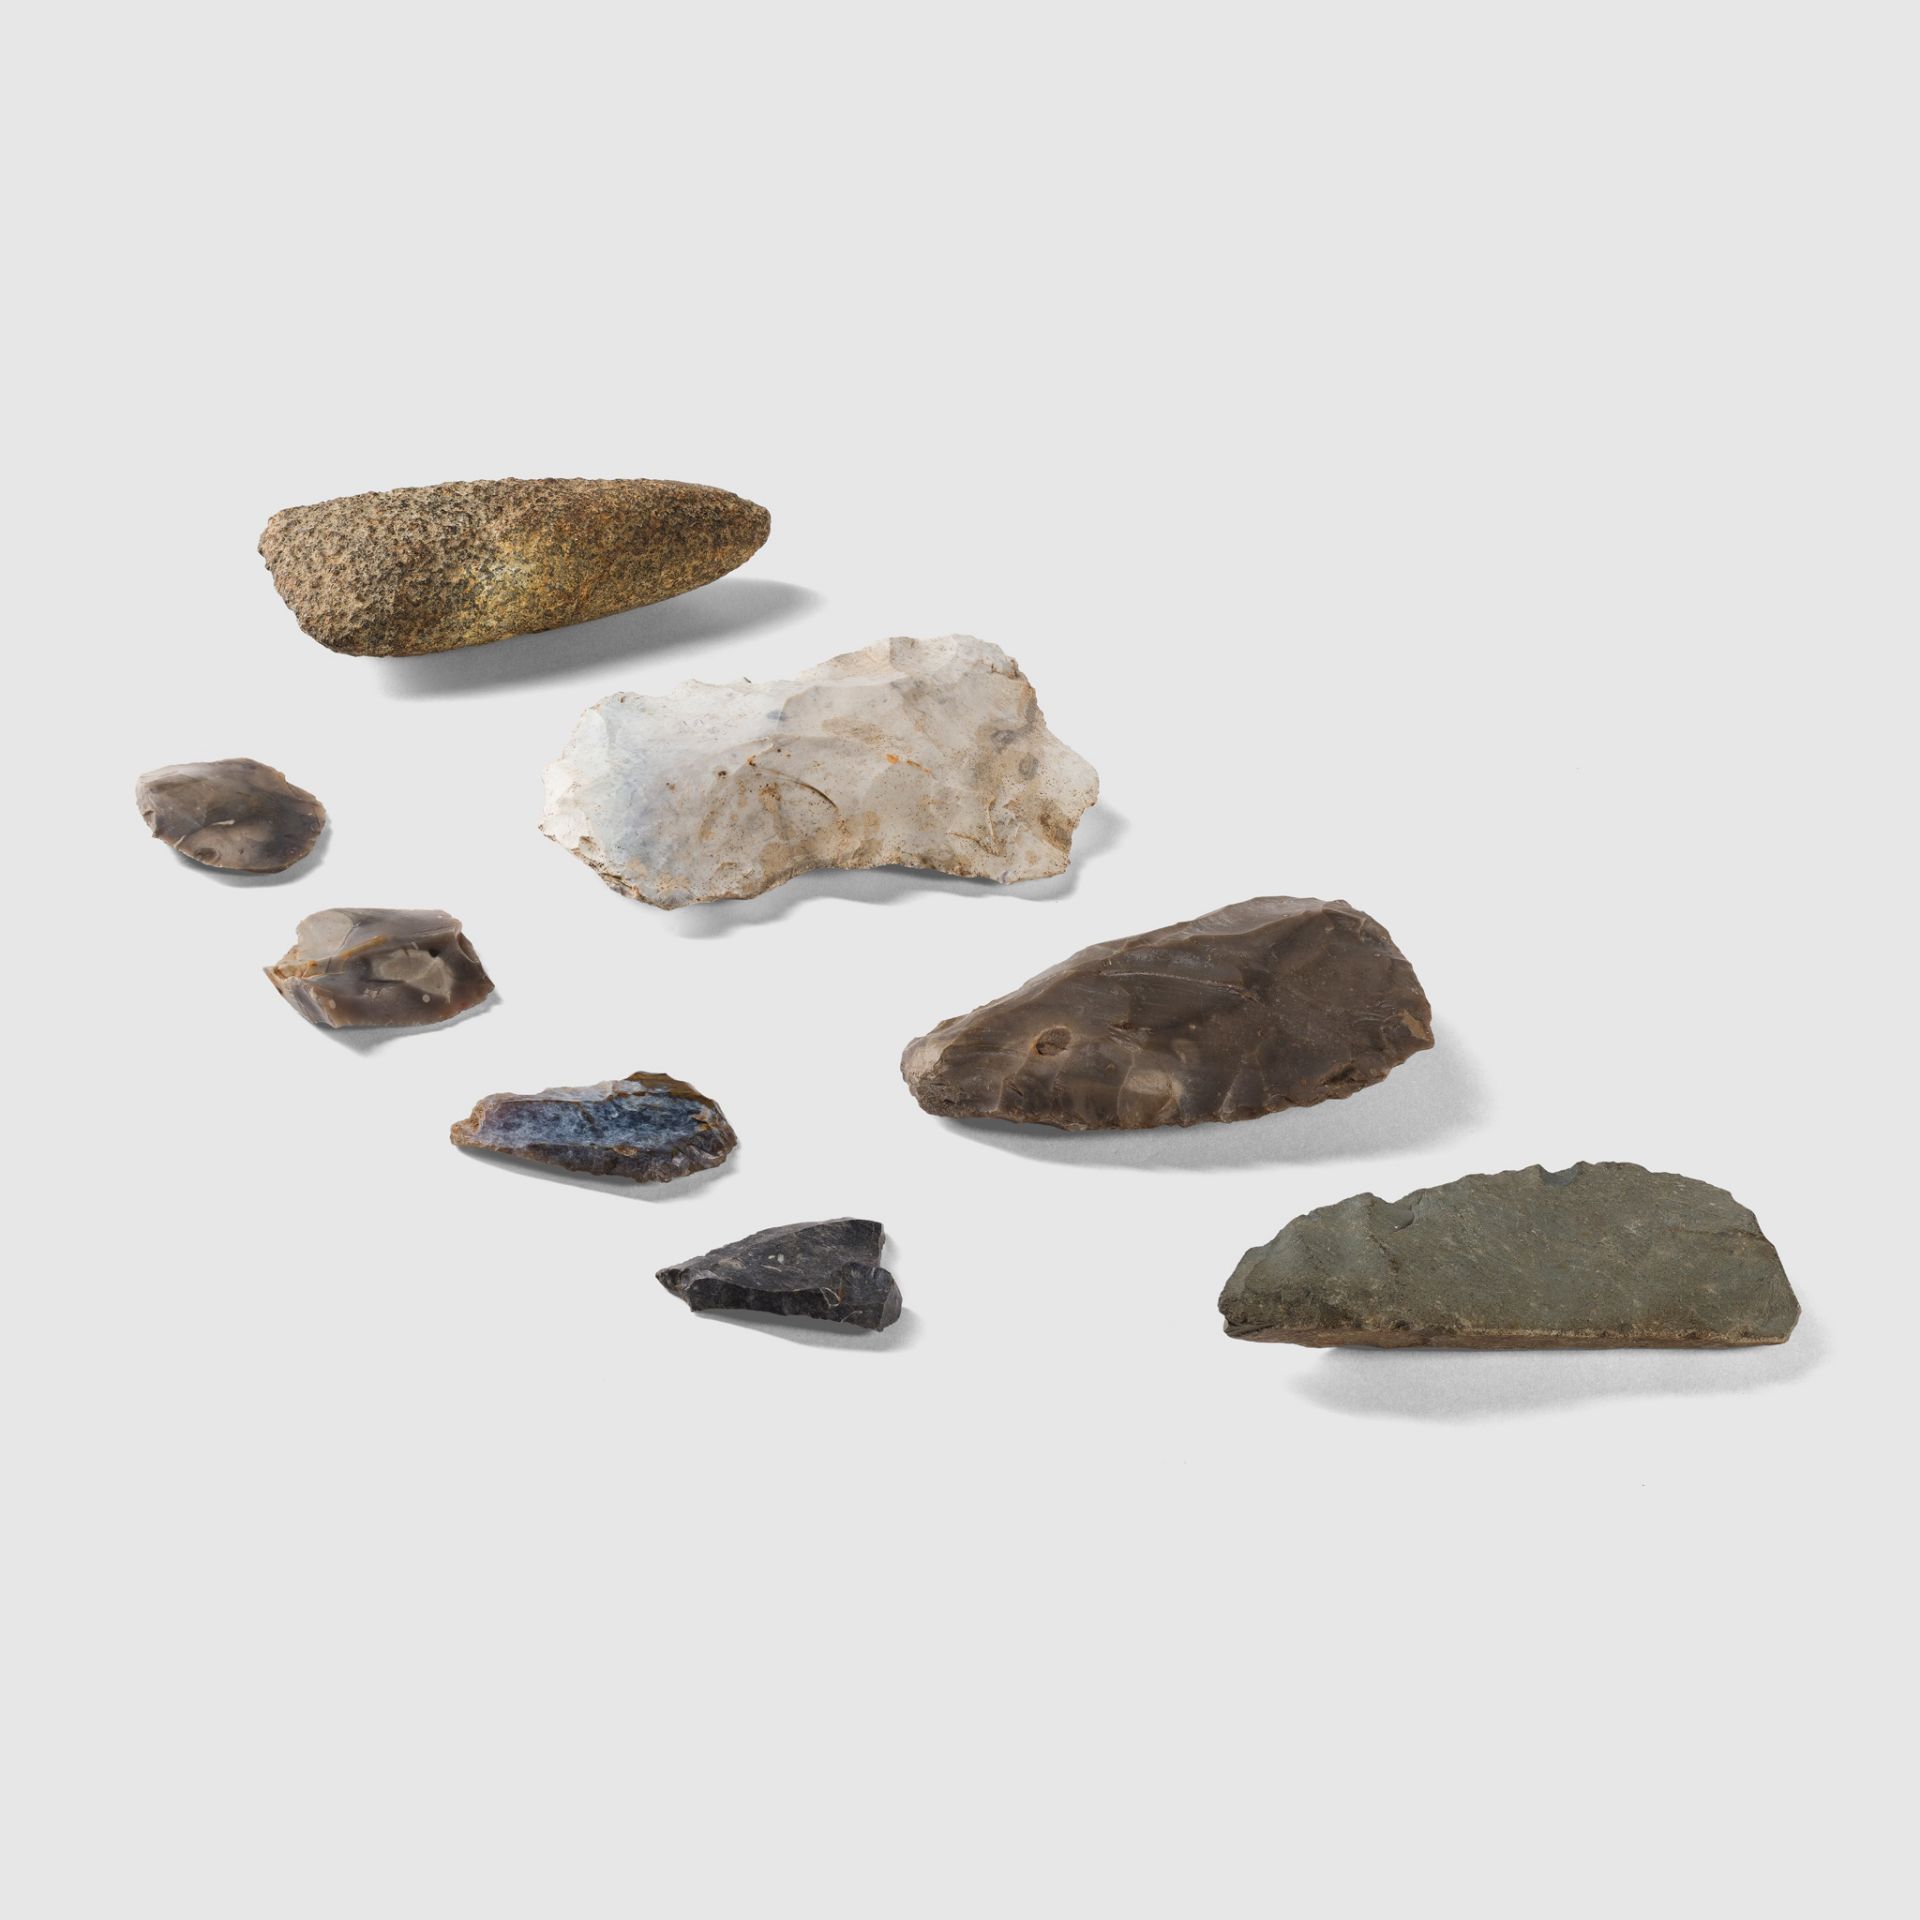 COLLECTION OF NEOLITHIC TOOLS WESTERN EUROPE, 3RD MILLENIUM B.C.